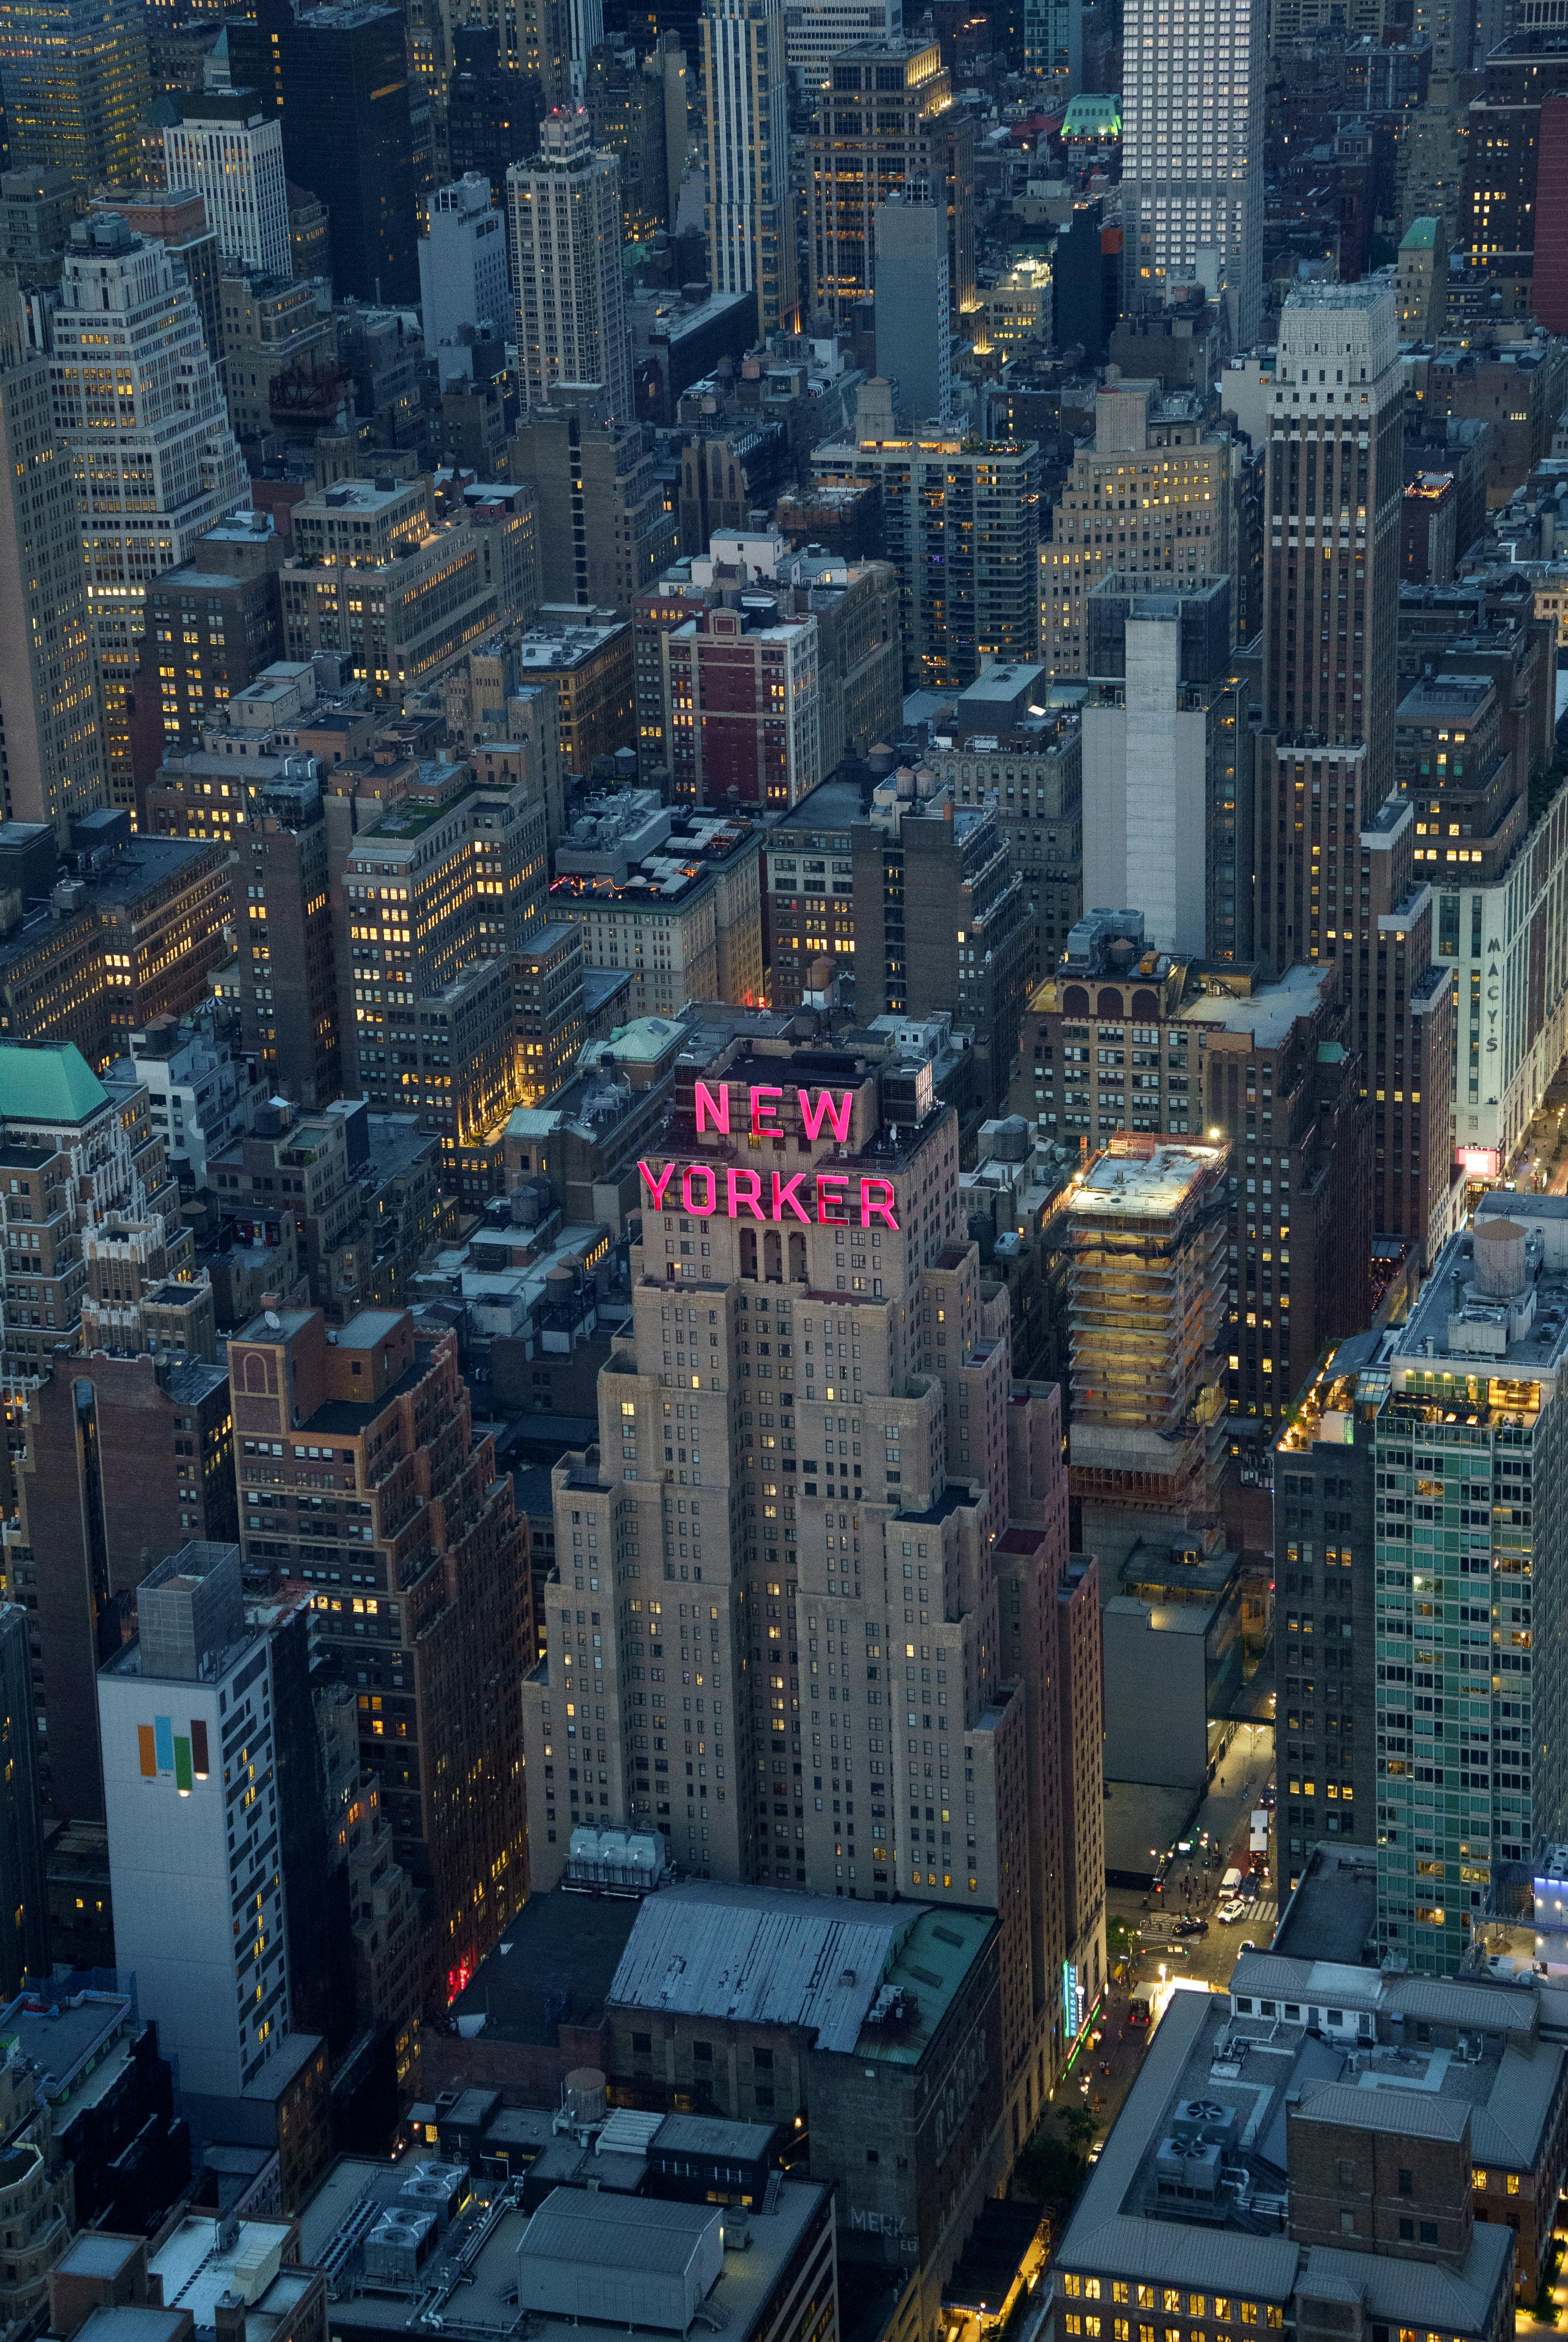 aerial view of the new yorker hotel in new york city new york usa